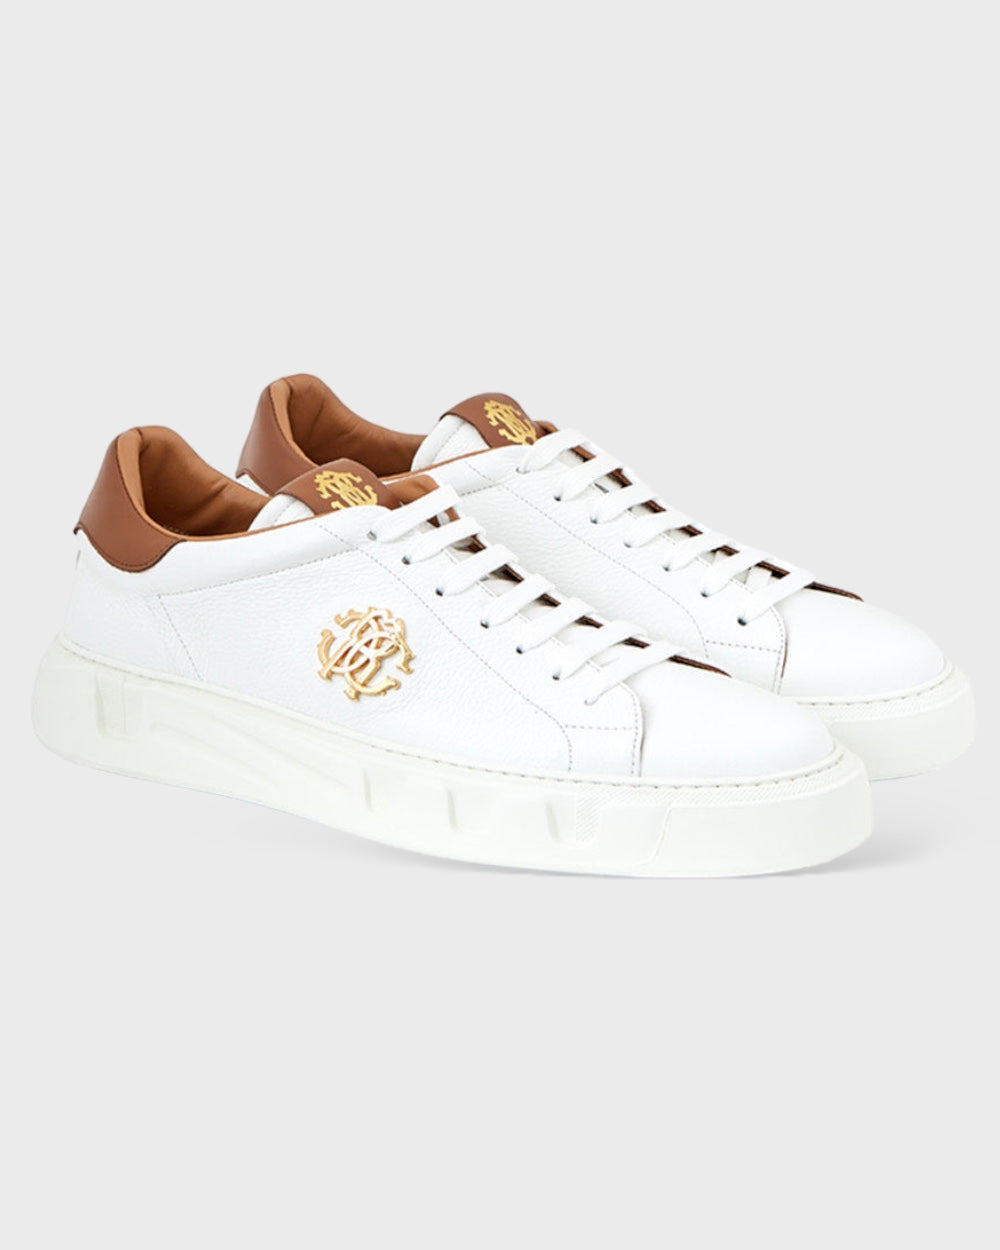 Roberto Cavalli White Leather Sneakers with Gold Logo